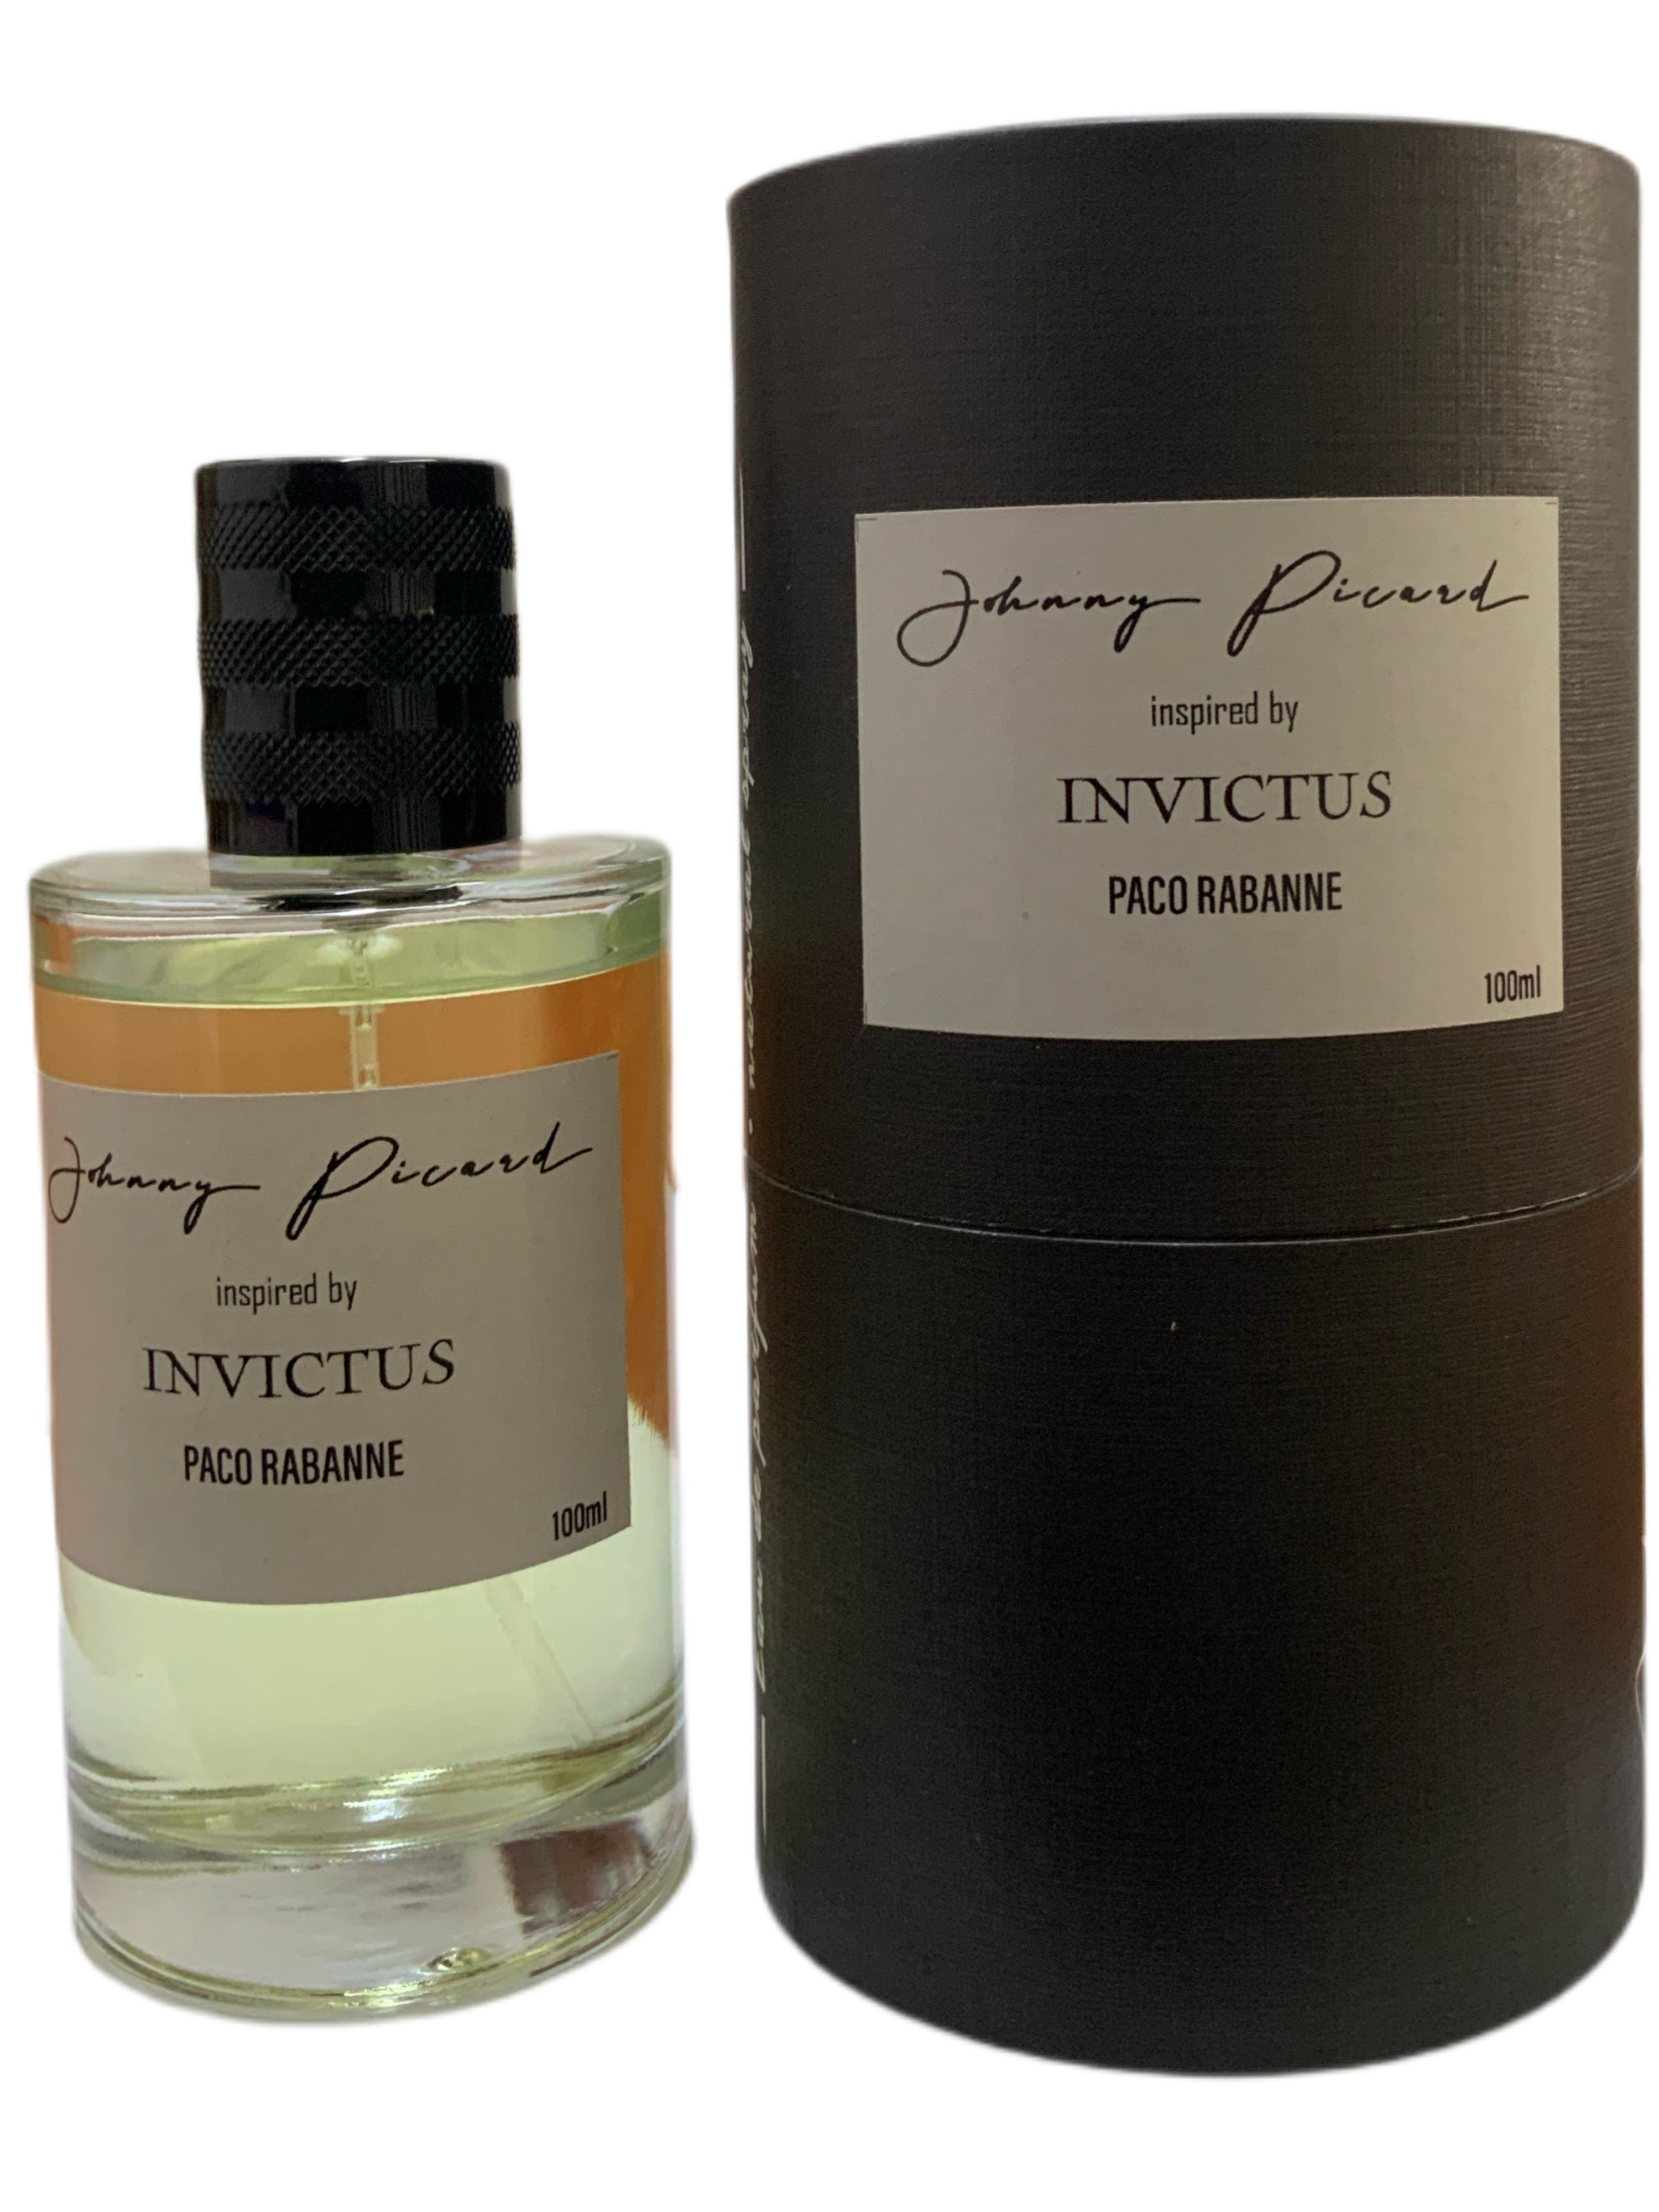 johnny picard inspired by invictus  PACO RABANNE